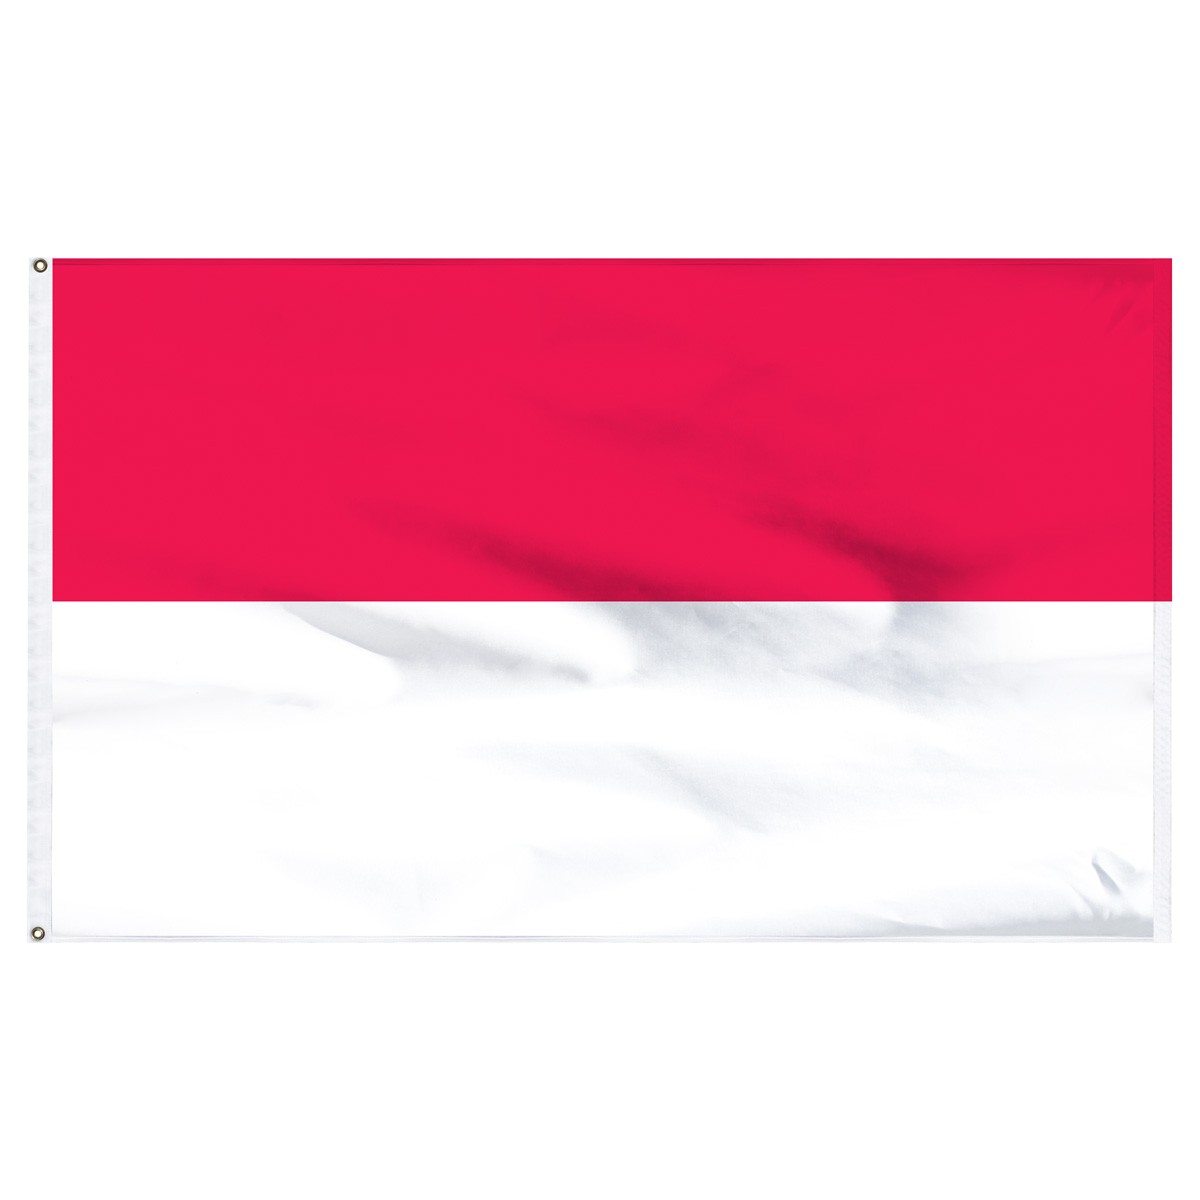 Indonesia Rope Pennants and Flags